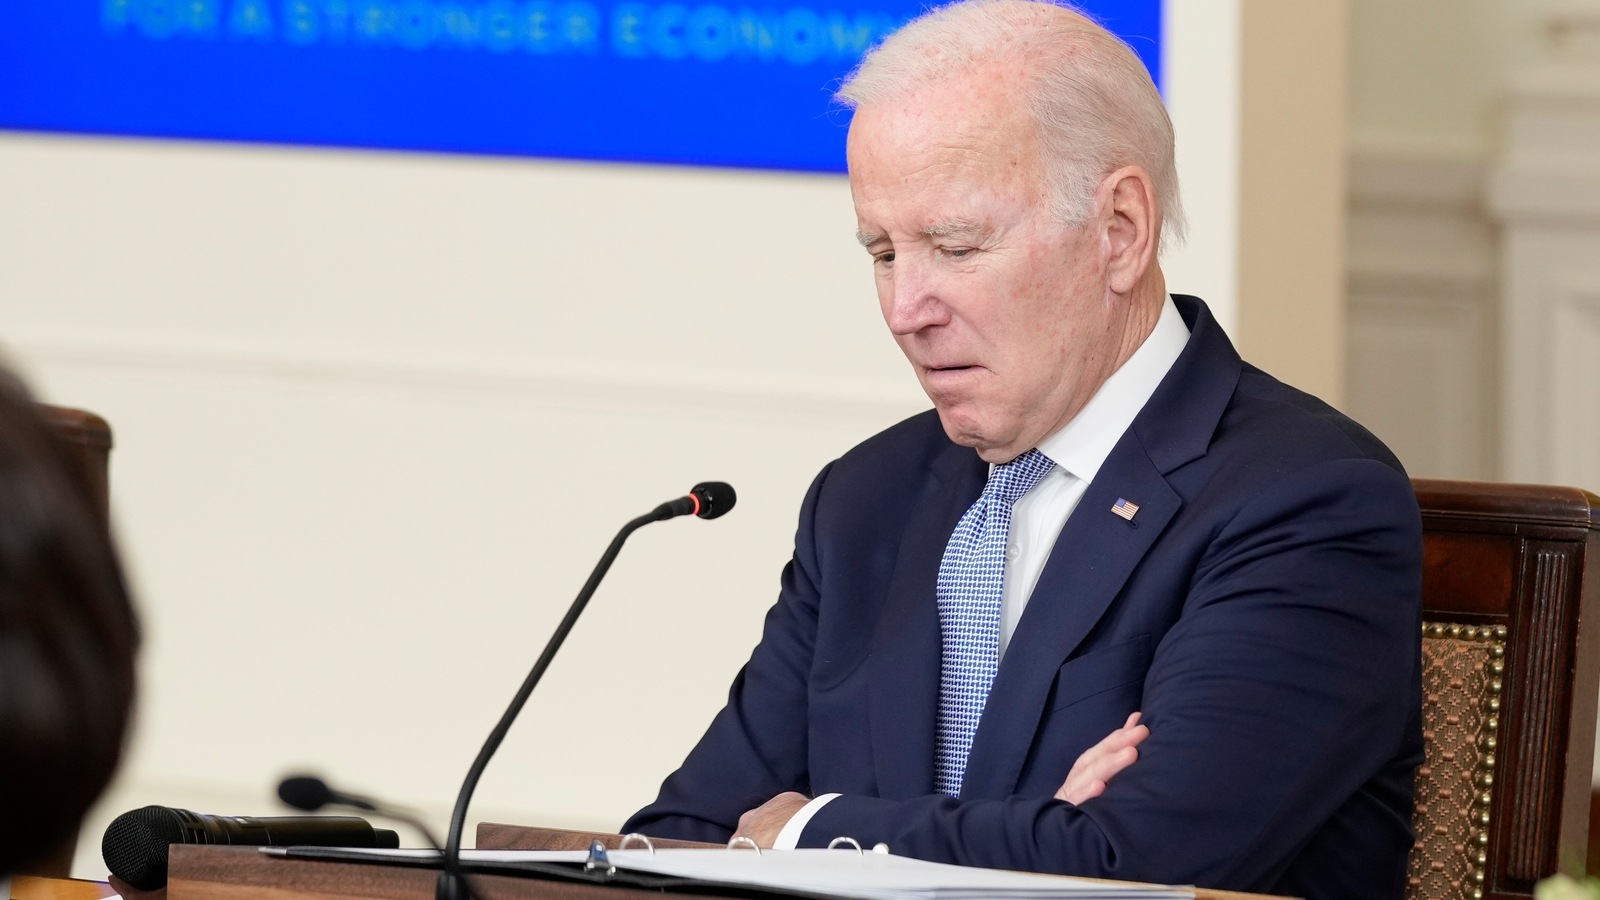 No classified documents found during search of Biden's home, says attorney